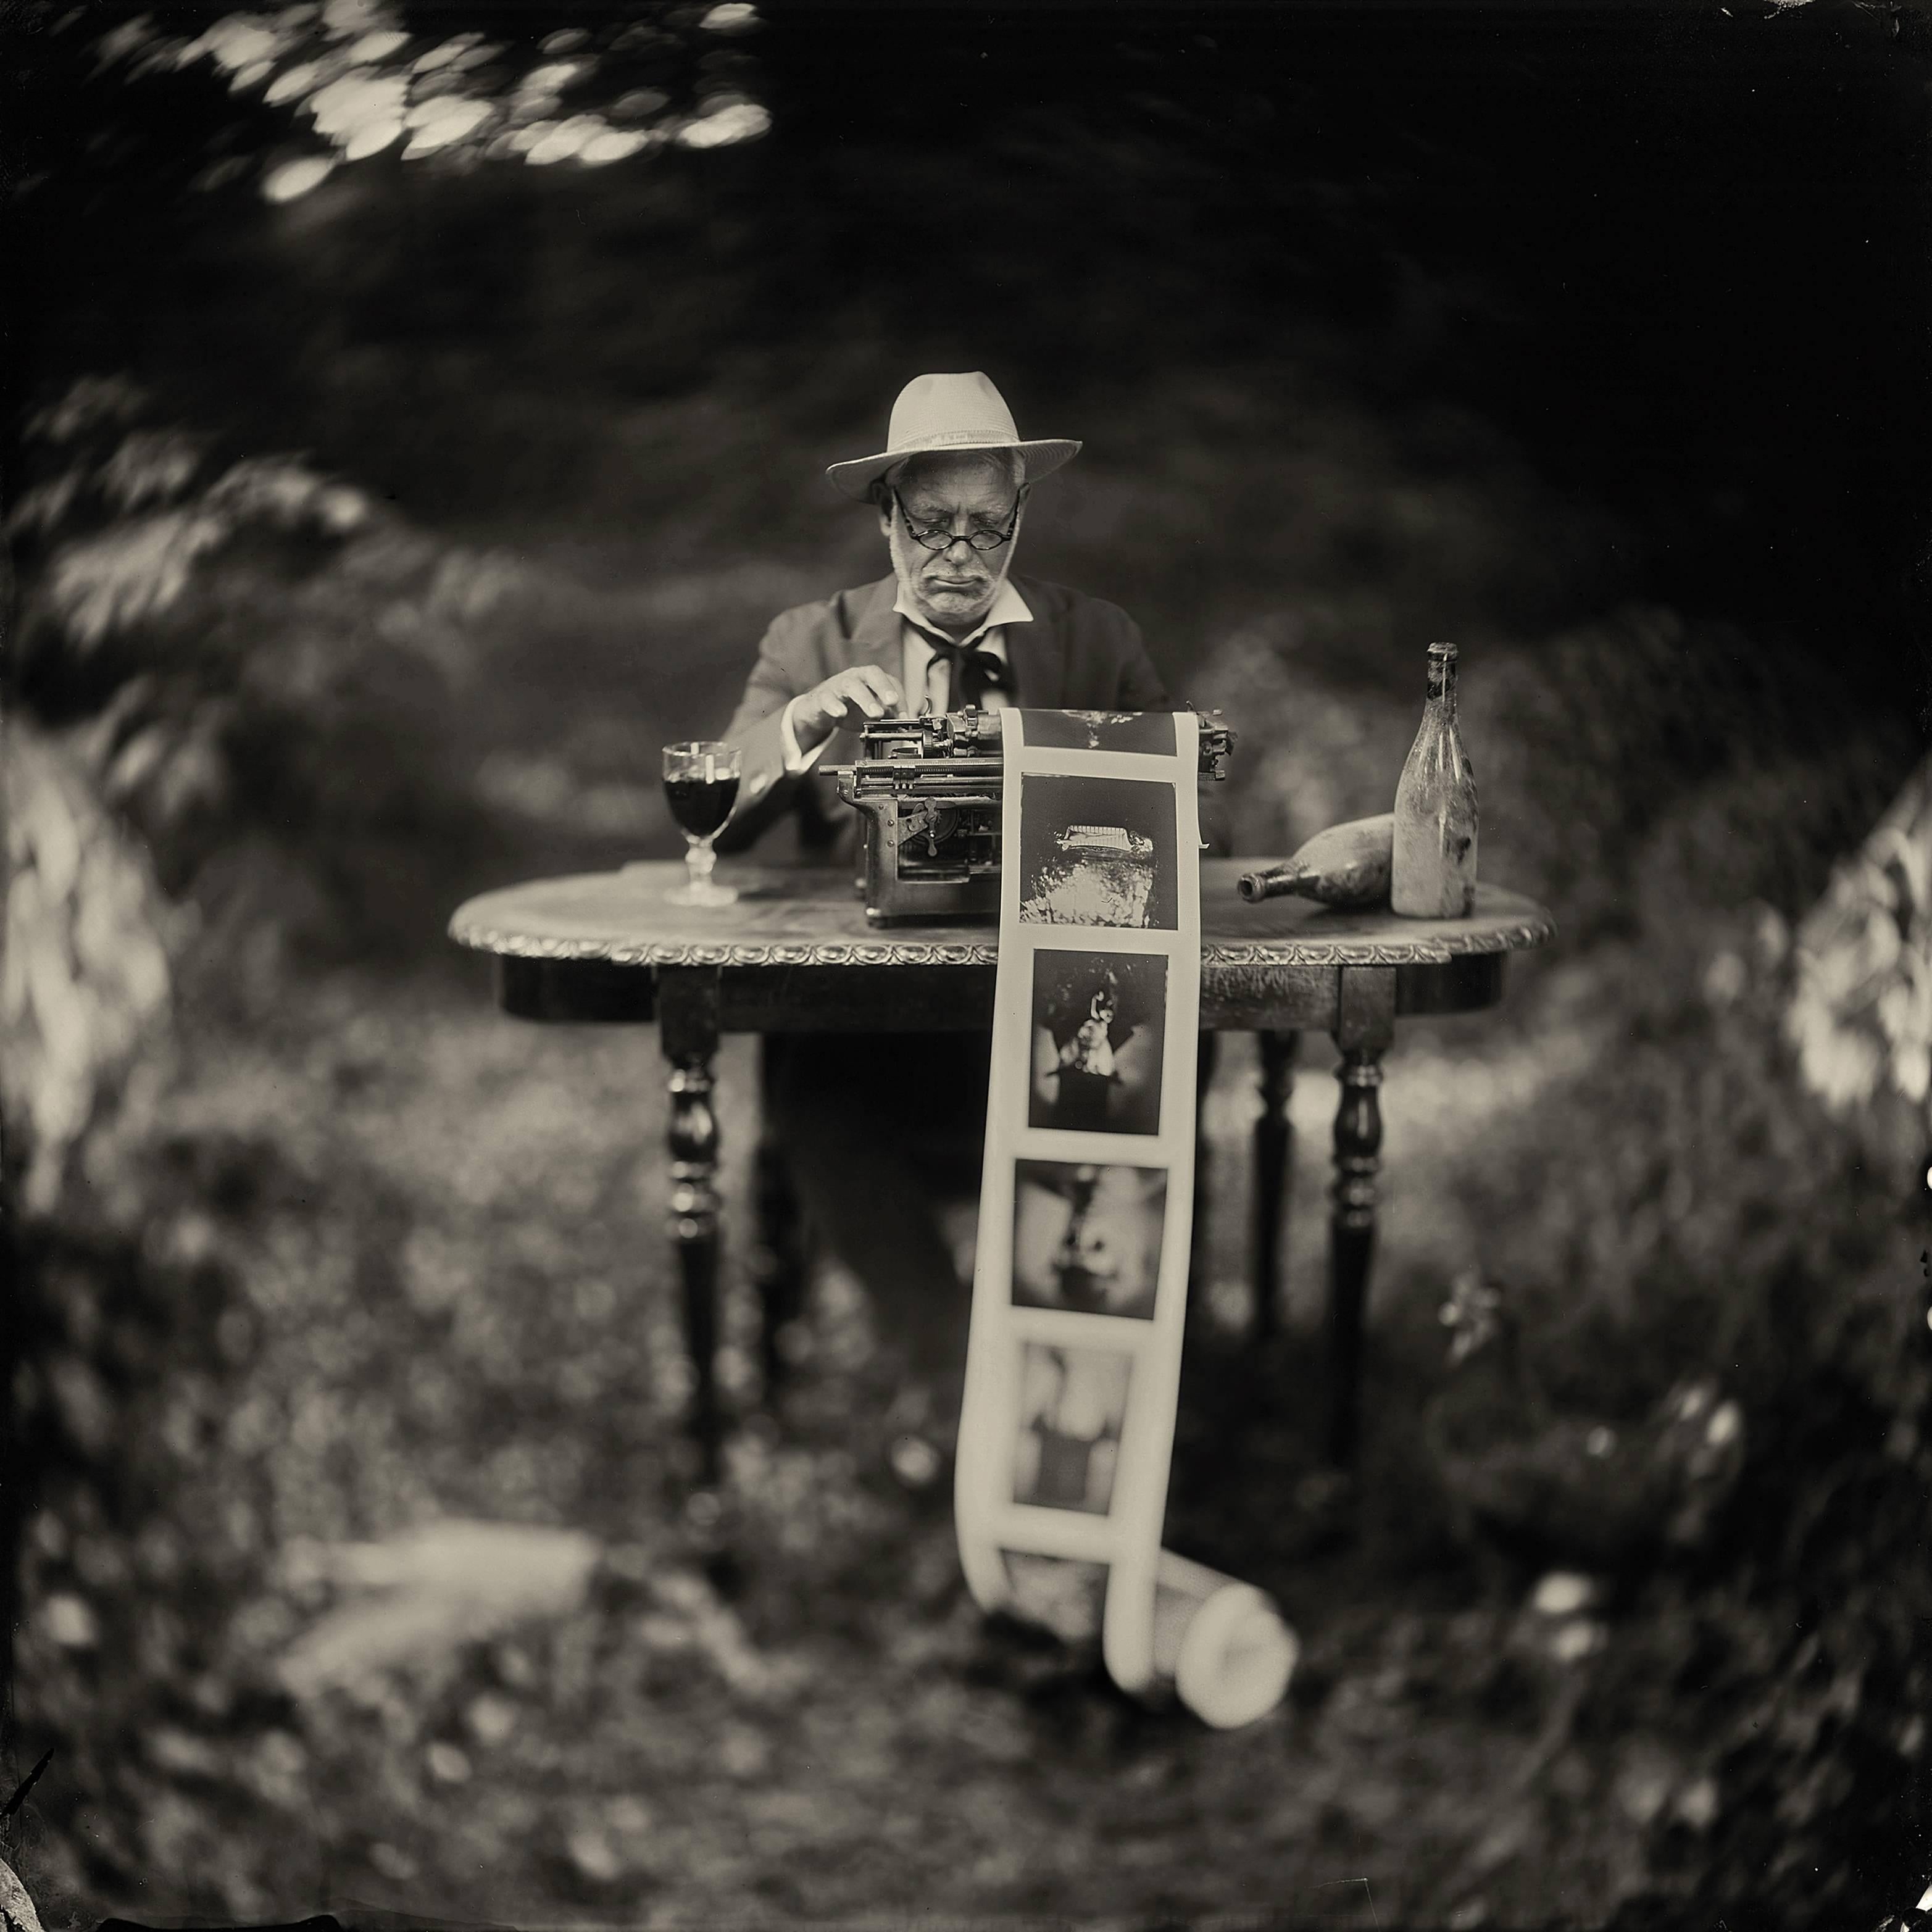 Alex Timmermans Black and White Photograph - The Image Maker